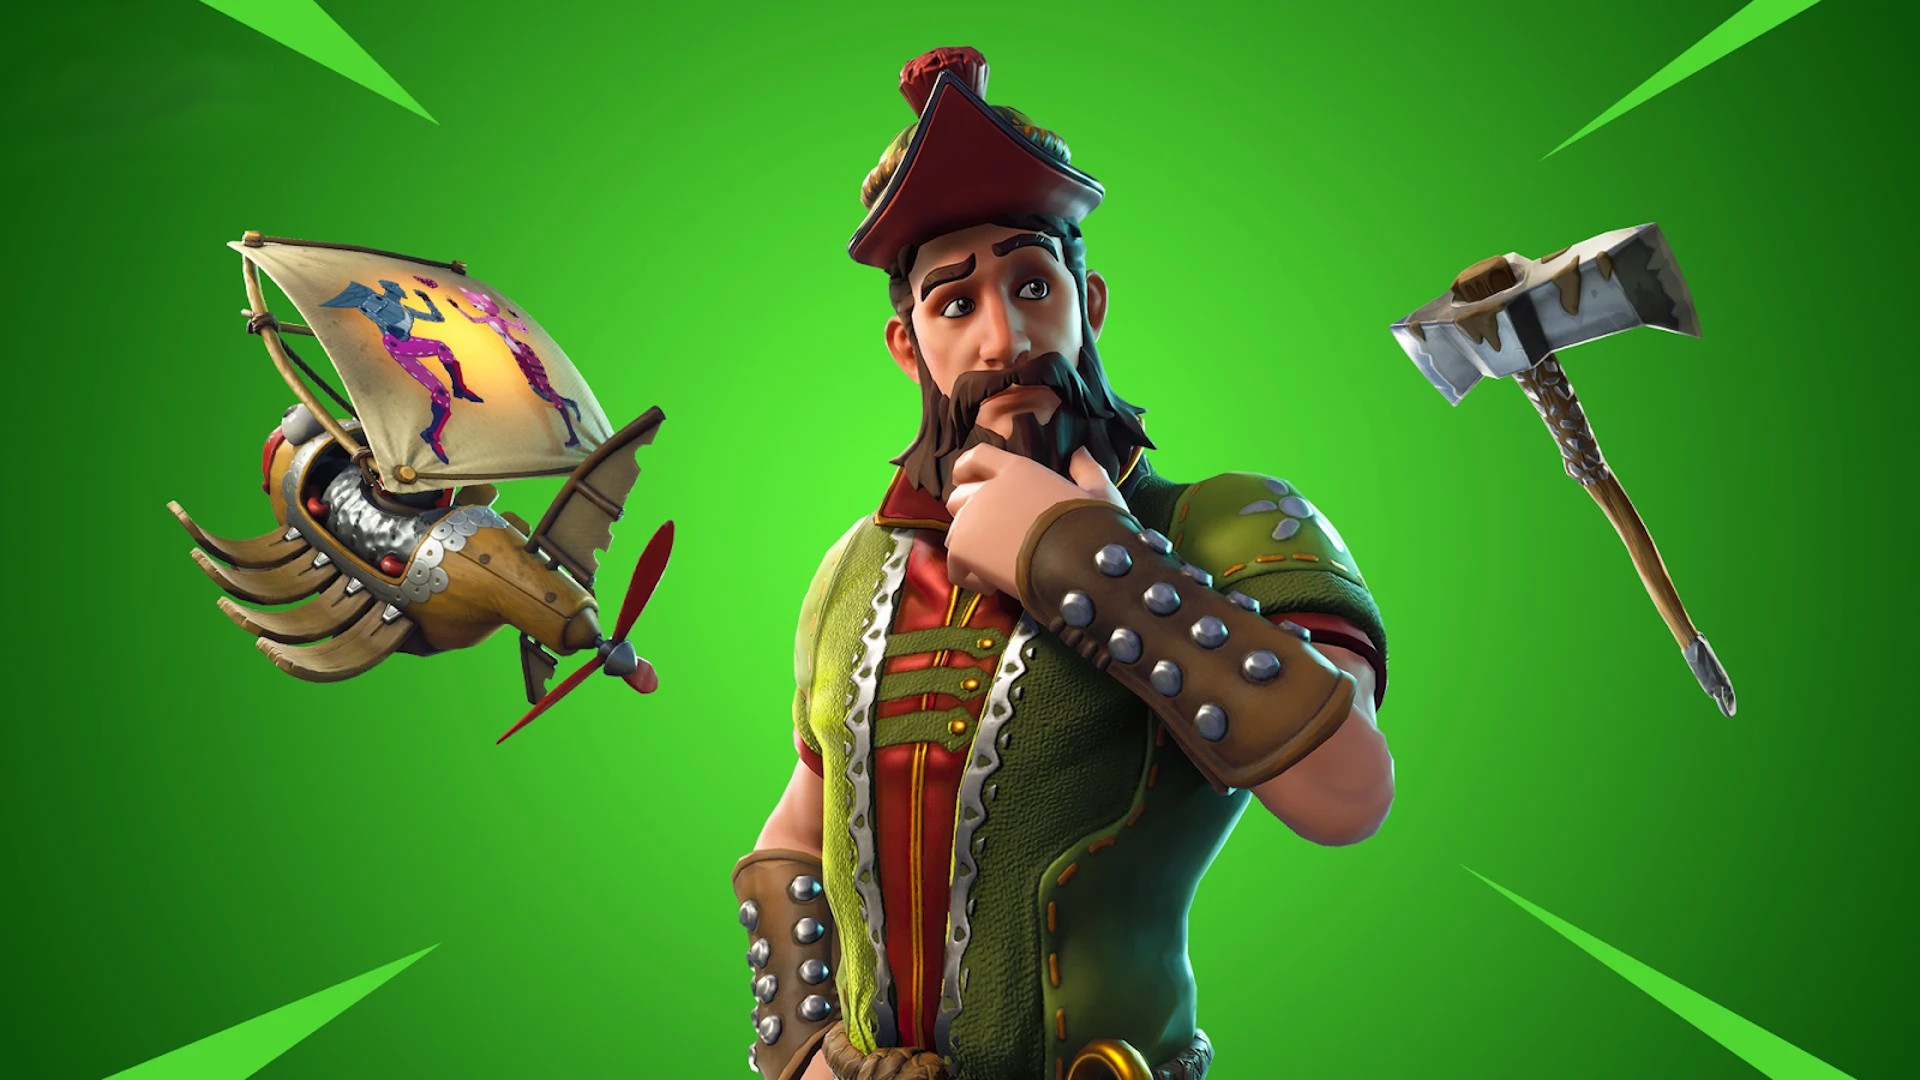 Rarest Fortnite skins: Hacivat posing with his hand on his chest, with a glider to the left and an ice to the right.